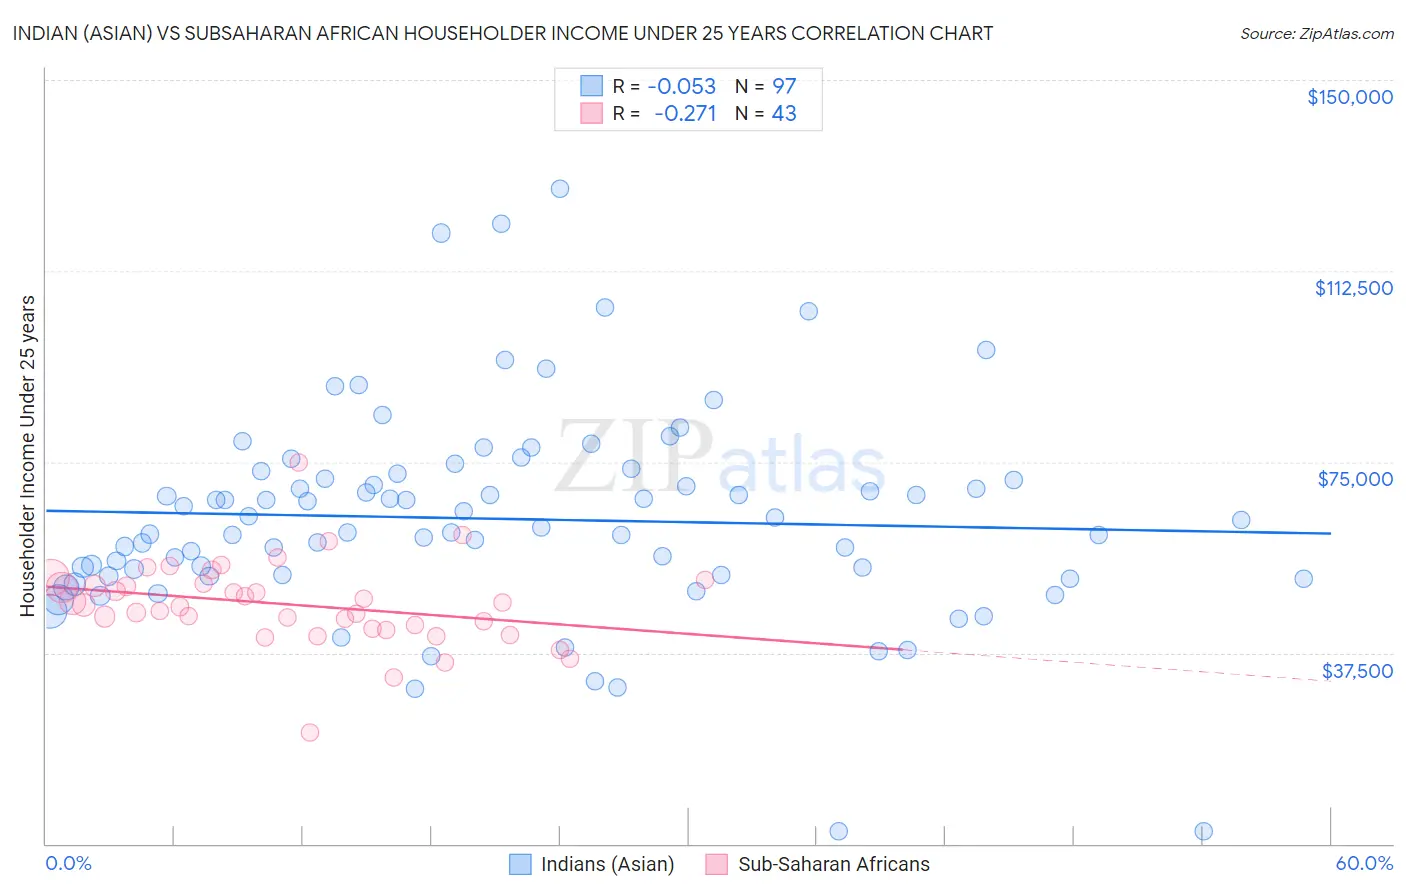 Indian (Asian) vs Subsaharan African Householder Income Under 25 years